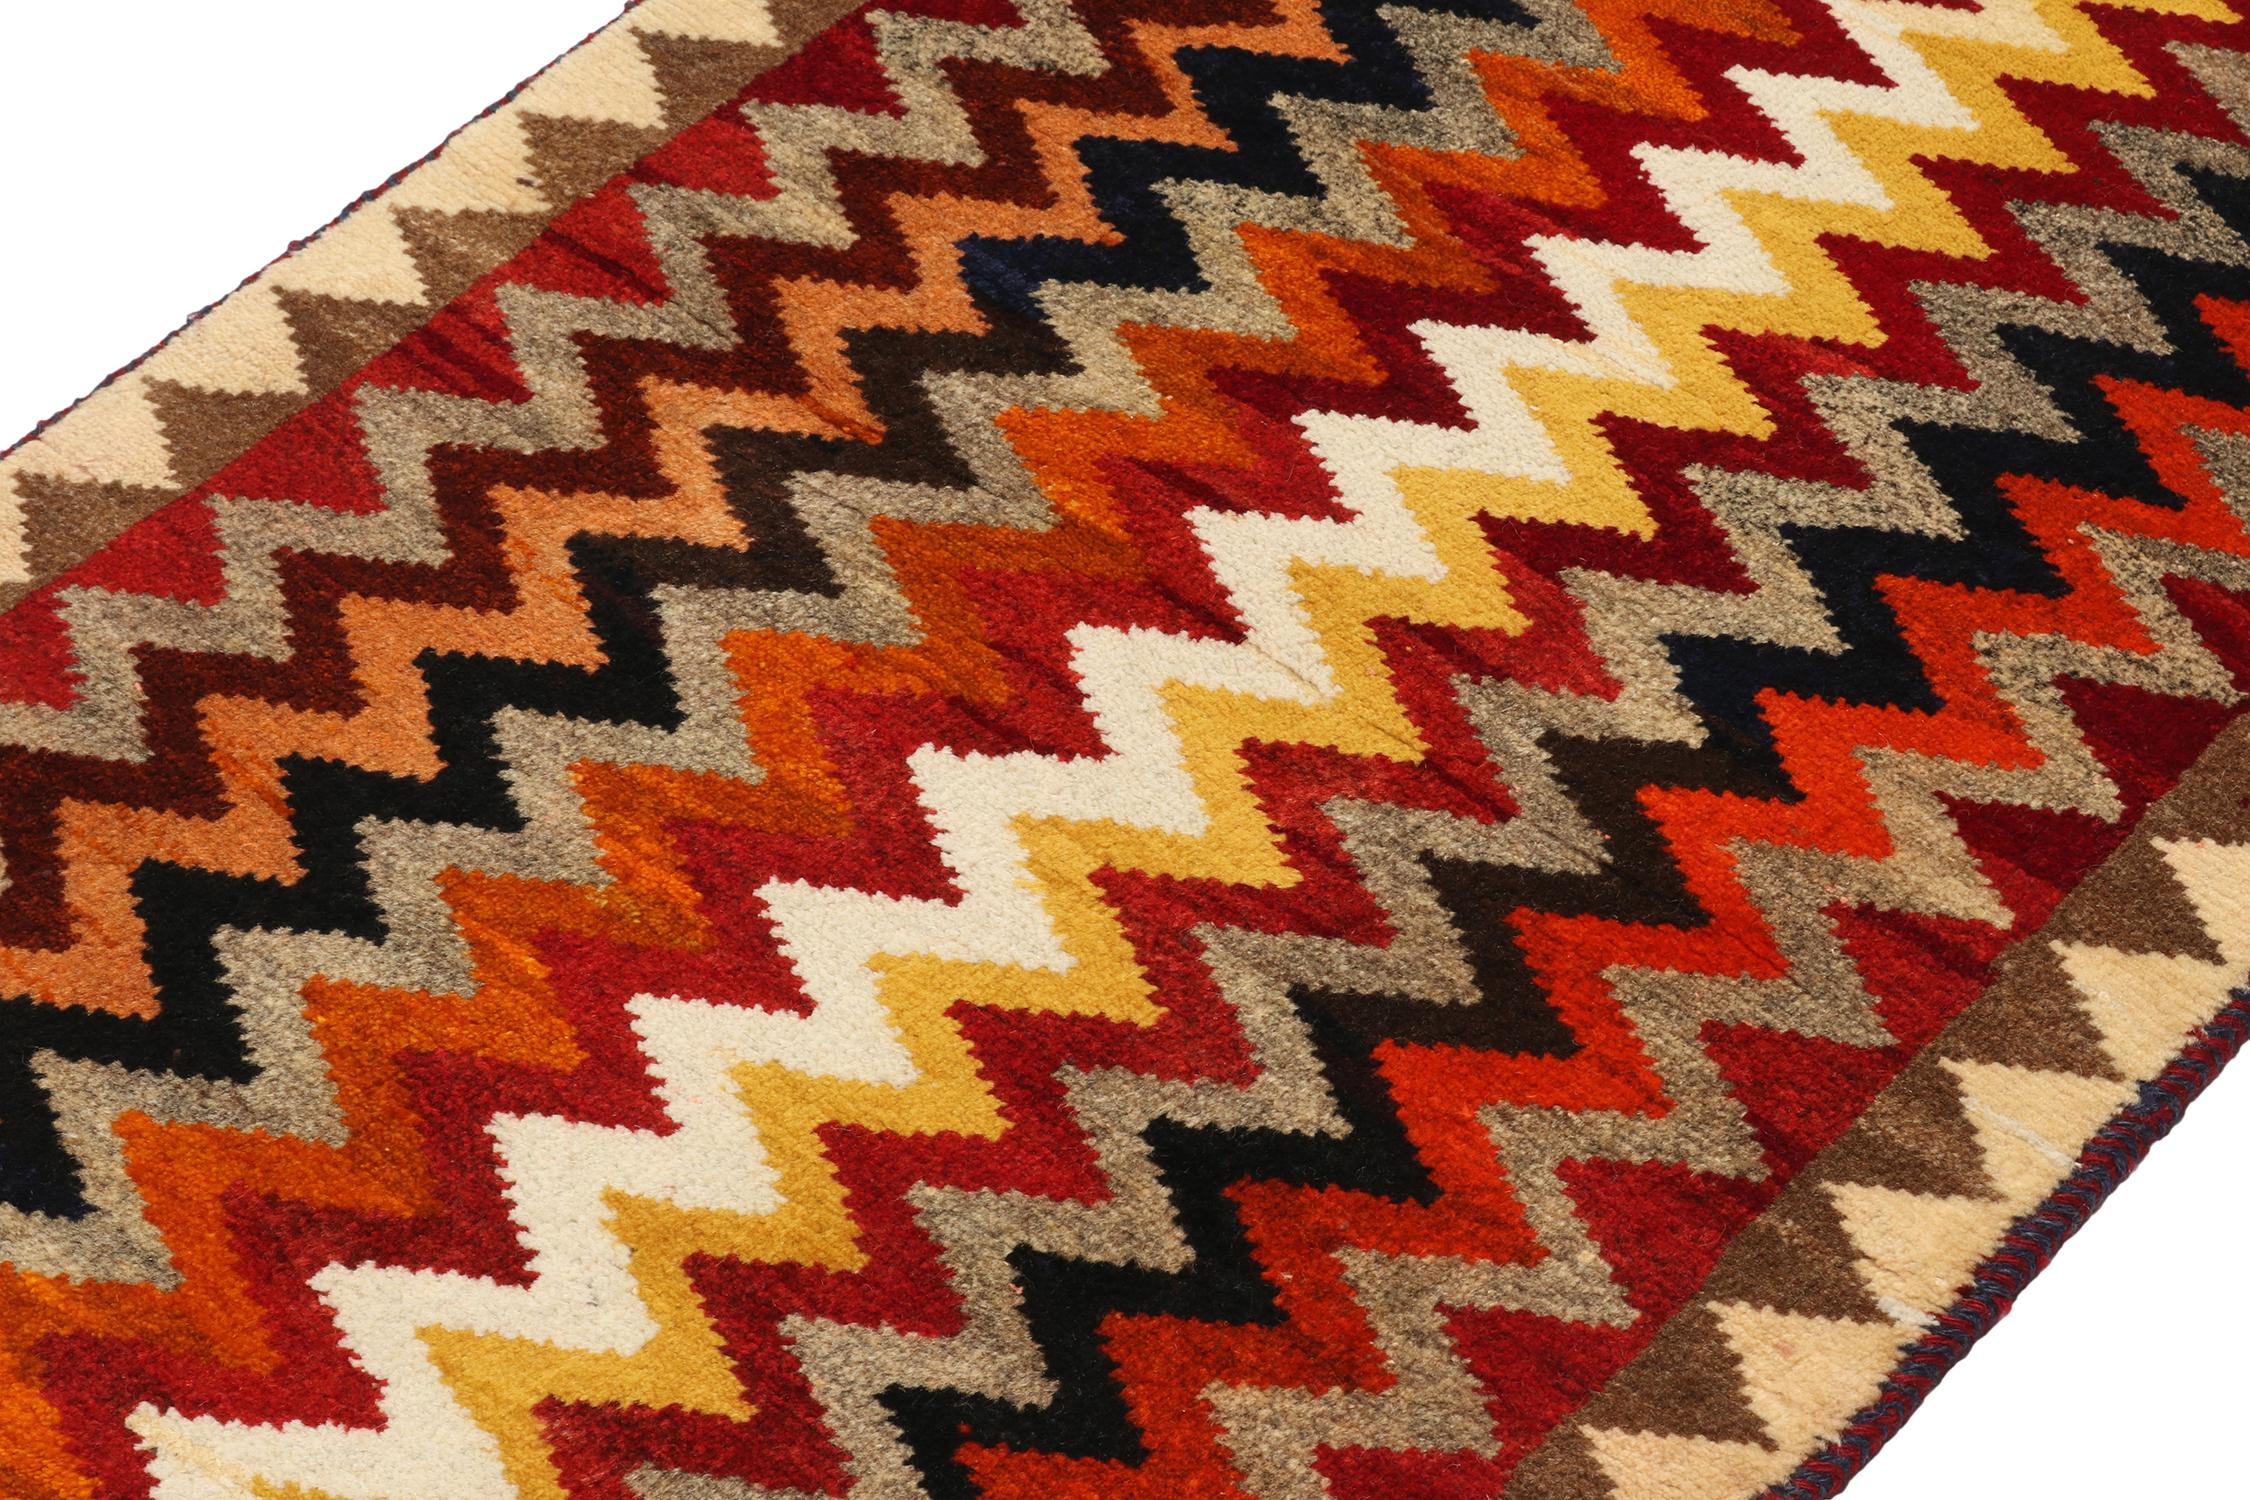 Hand-Knotted Vintage Gabbeh Persian Tribal Rug in Vibrant Chevron Patterns by Rug & Kilim For Sale